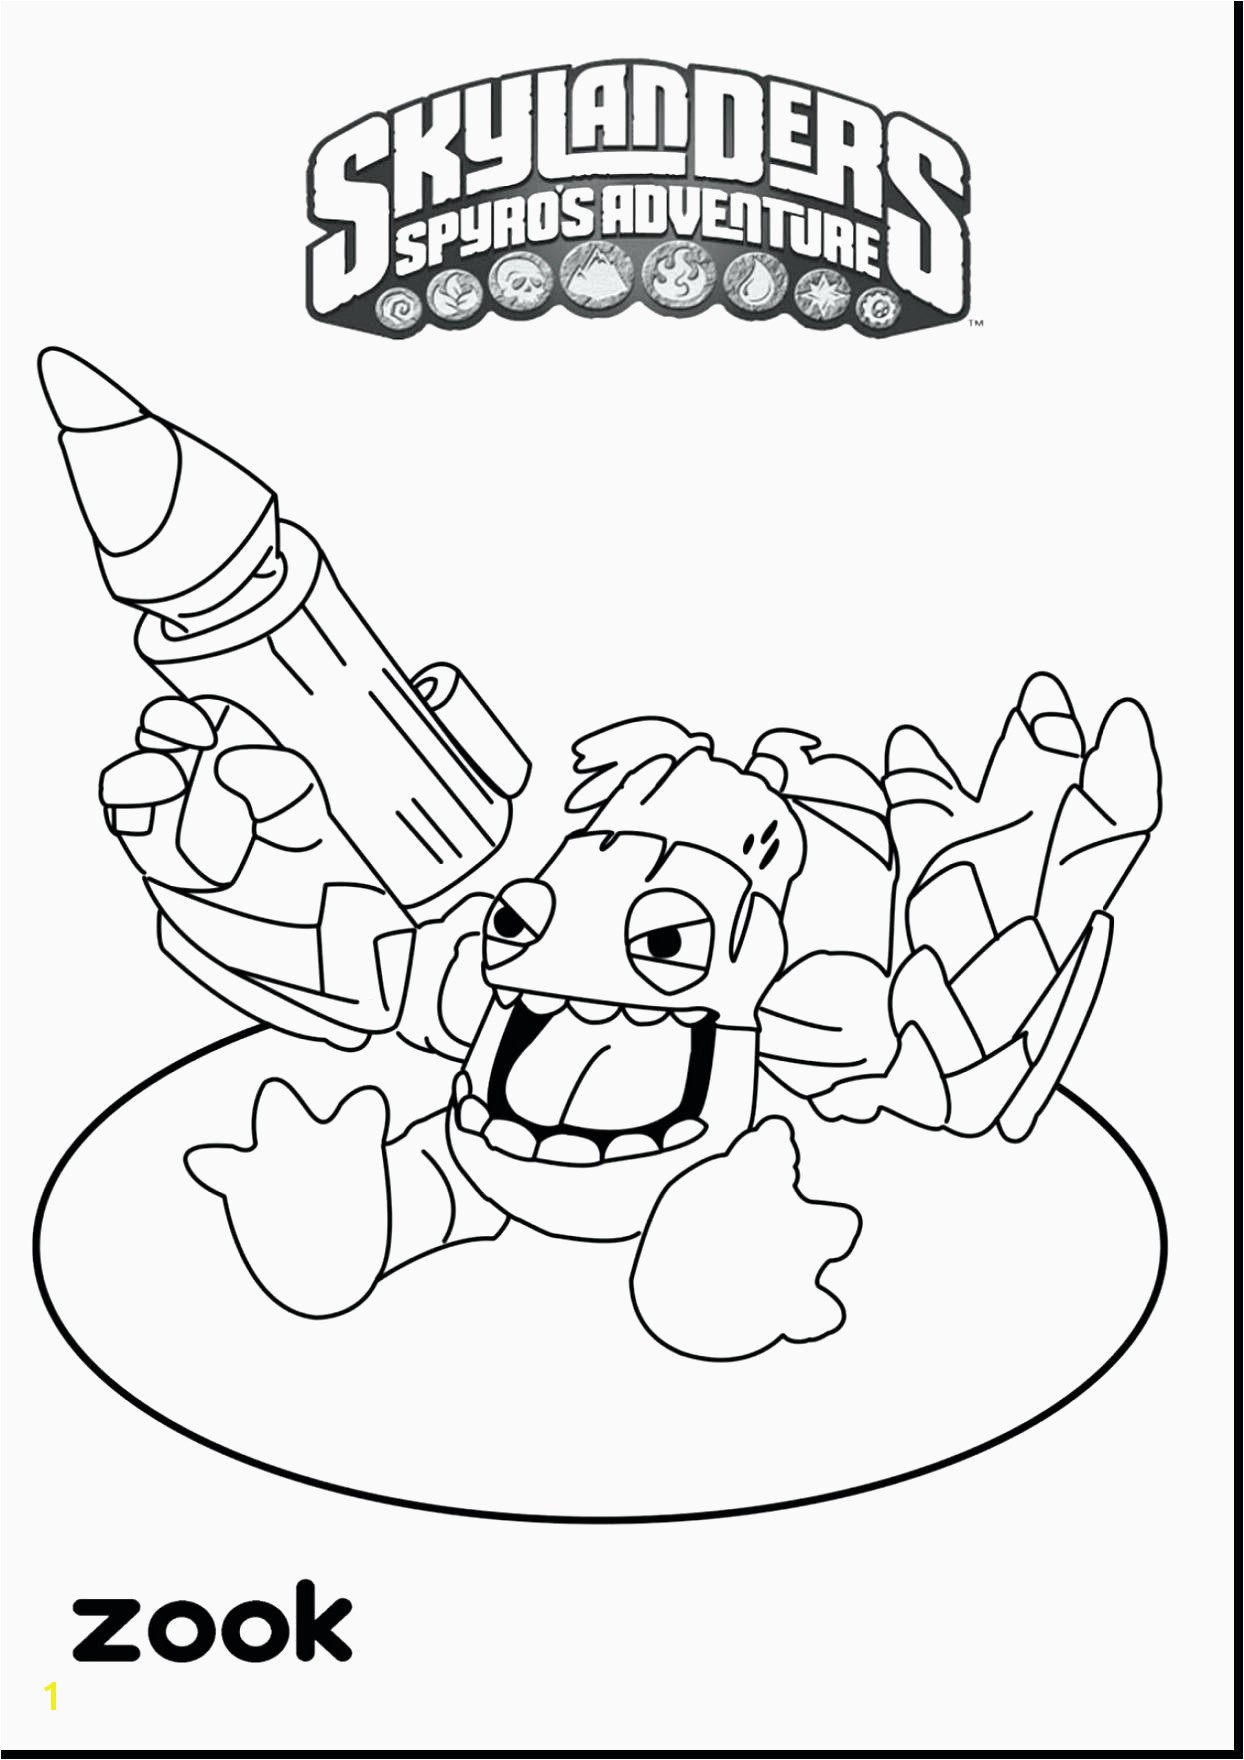 Coloring Book Pages Babies Fresh Baby Coloring Pages New Media Cache Ec0 Pinimg originals 2b